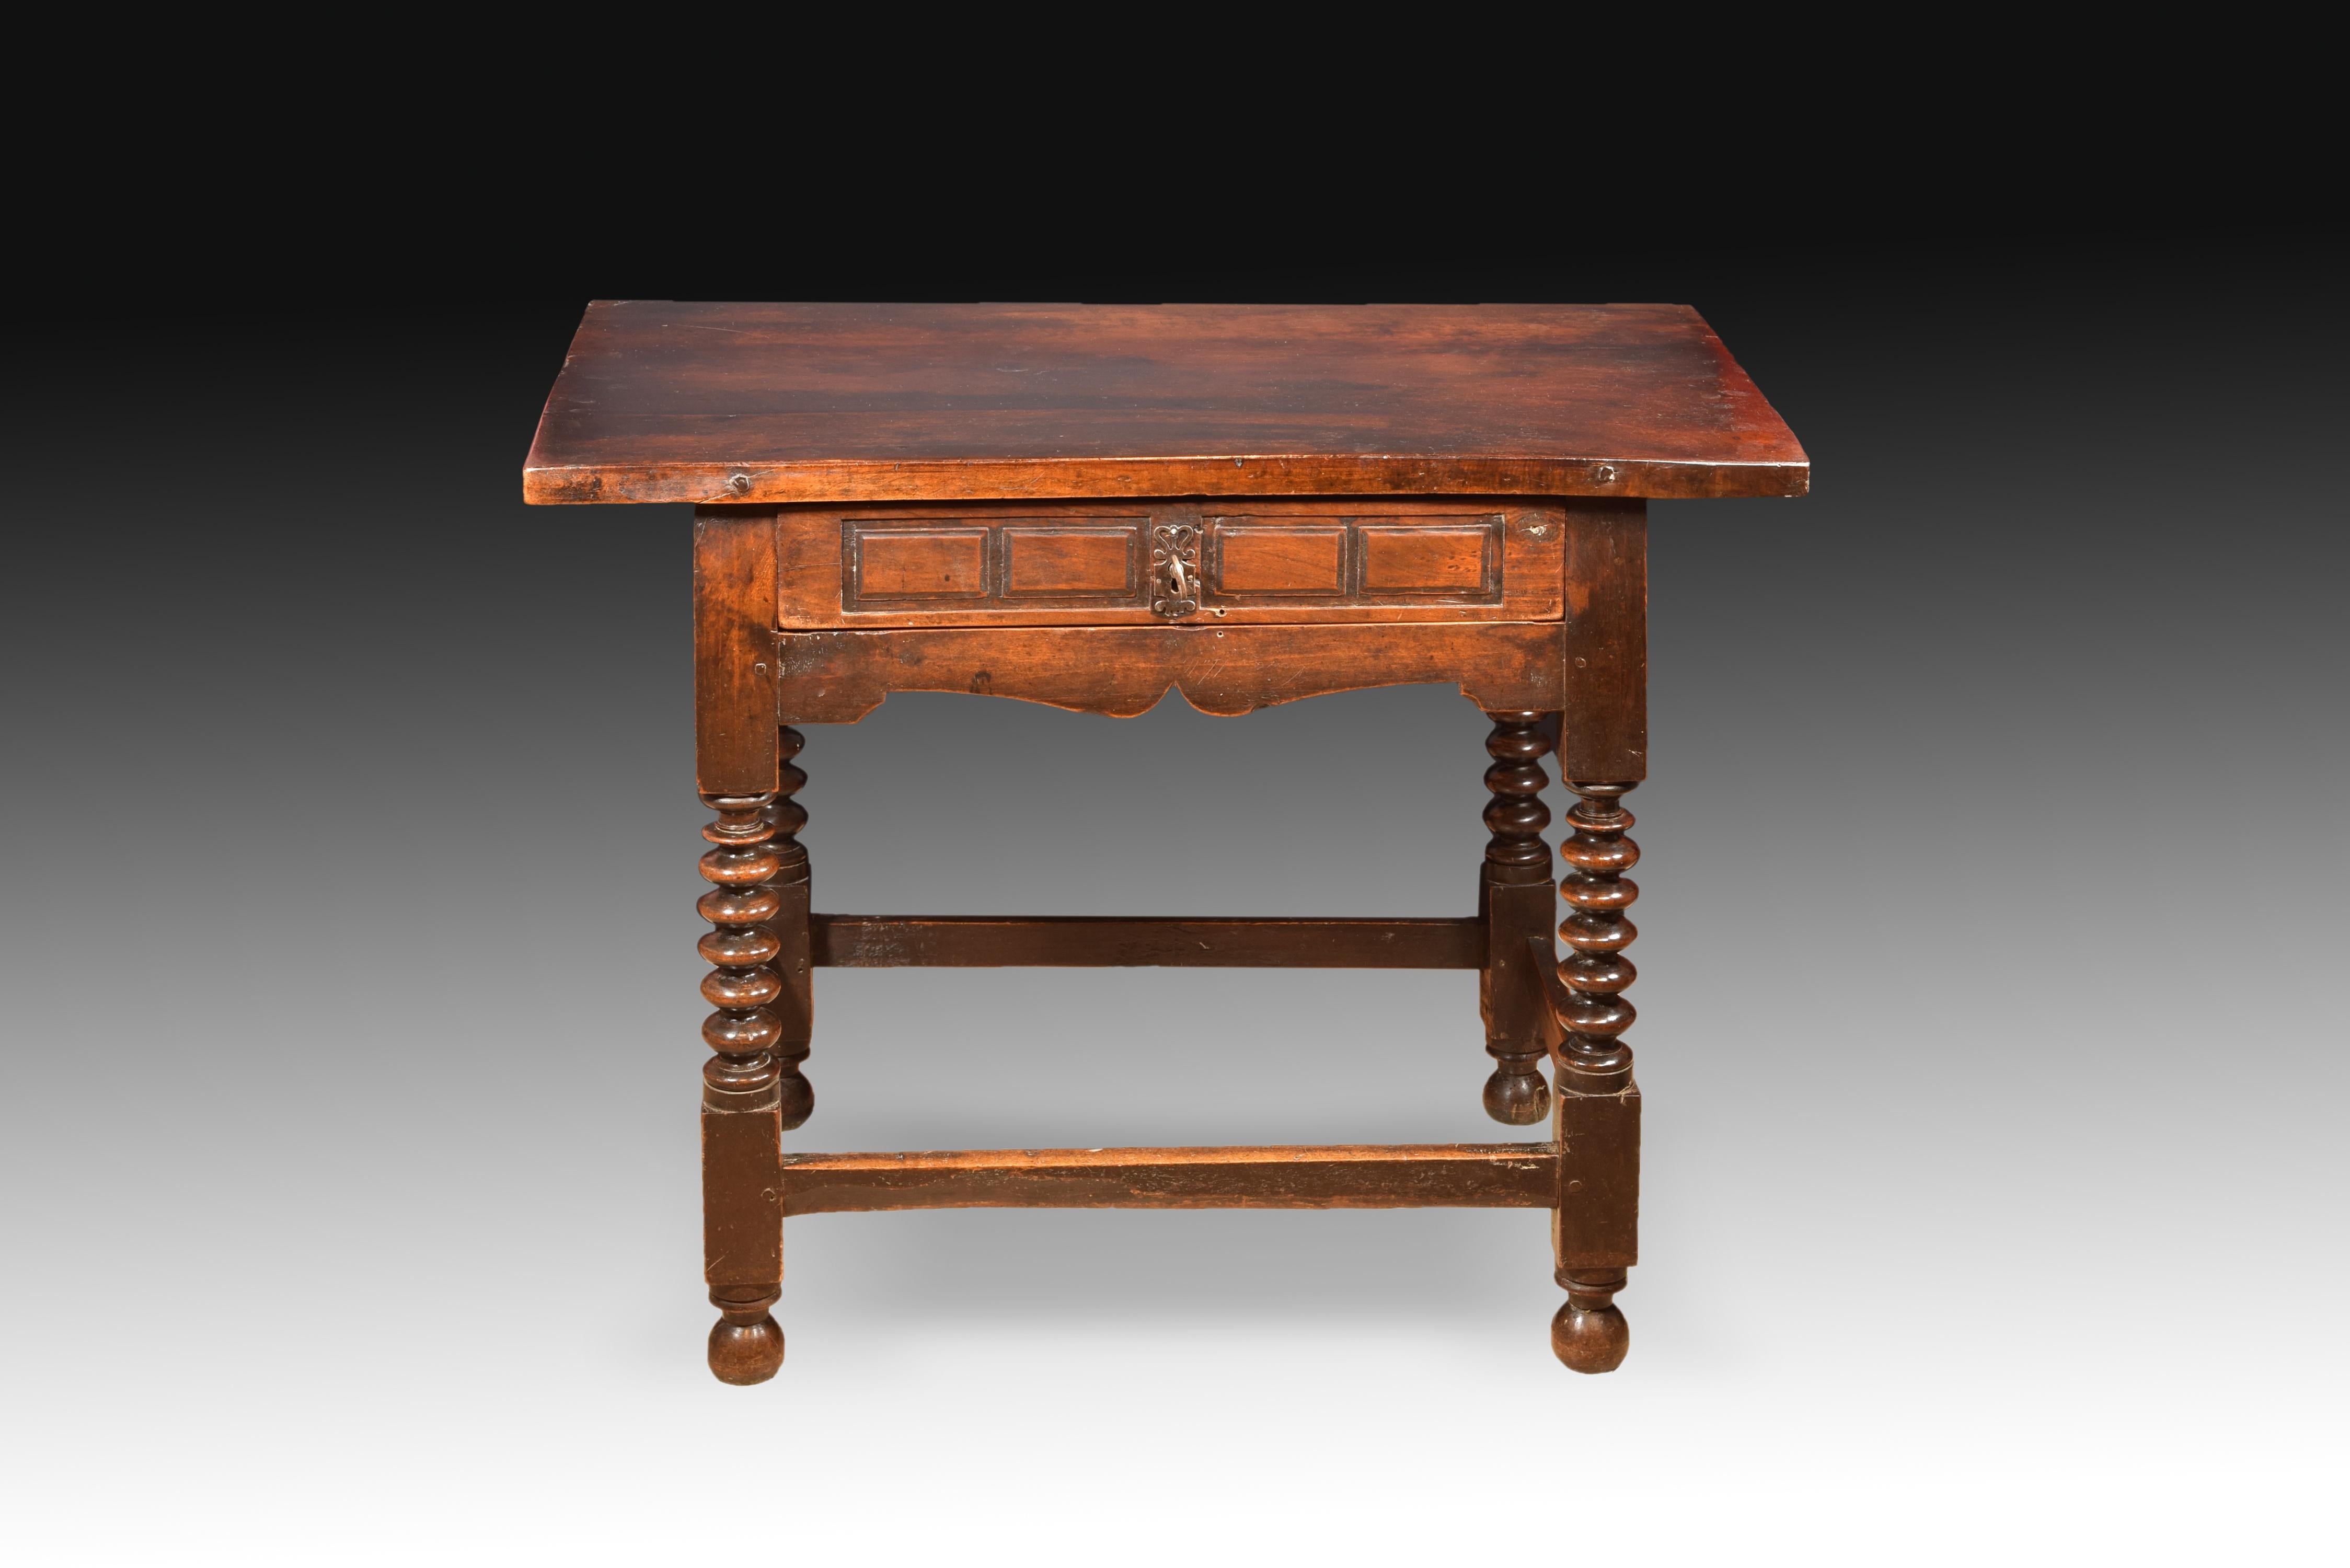 Table with rectangular upper board protruding on the sides and front drawer with rectangles carved on a lower molding curved towards the center. The four legs, located on balls, have 